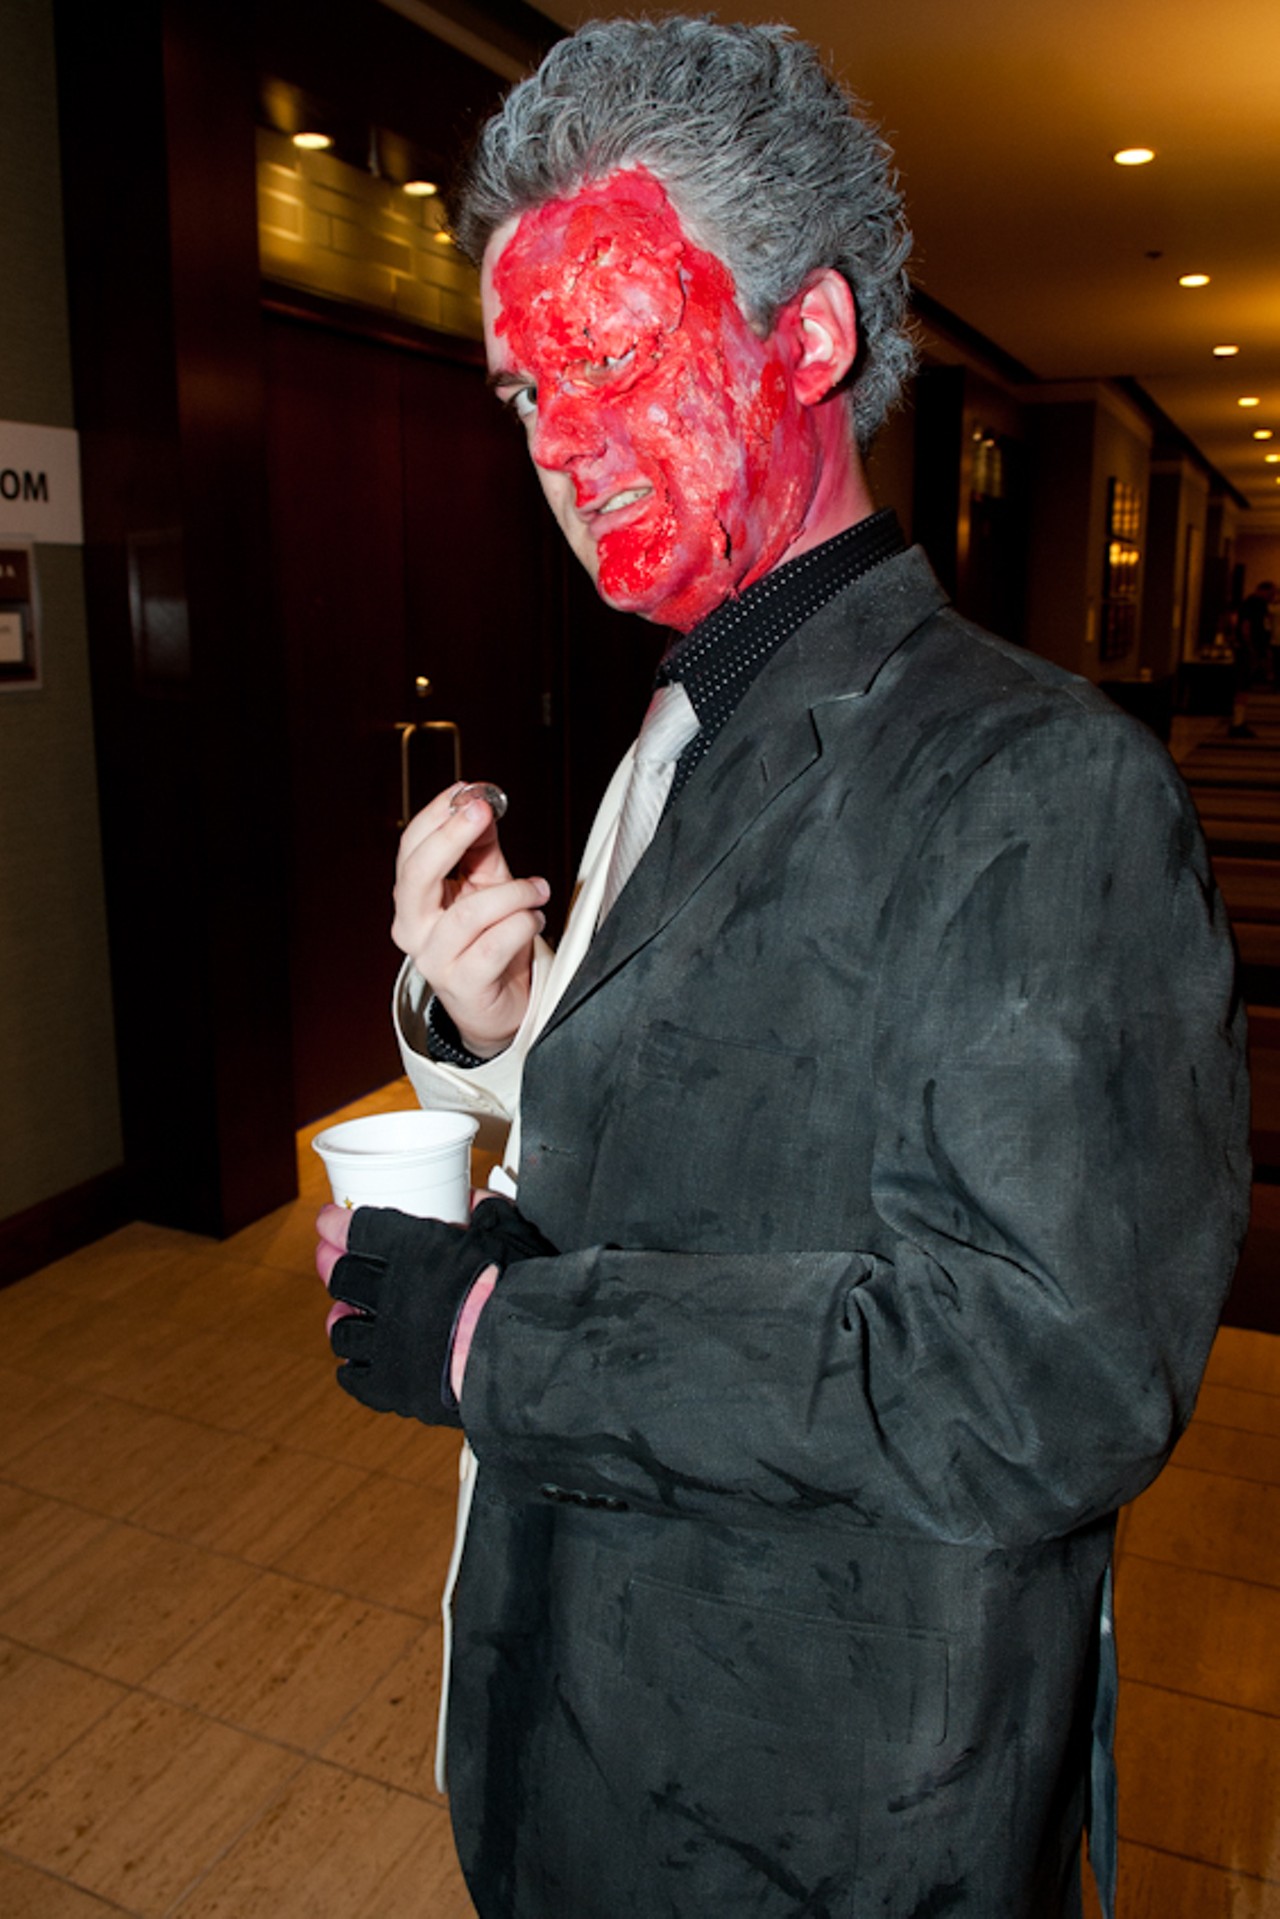 "Make sure you get my good side" says an Archon attendee dressed up as "Two-Face" from the Batman comics on September 30, 2011.